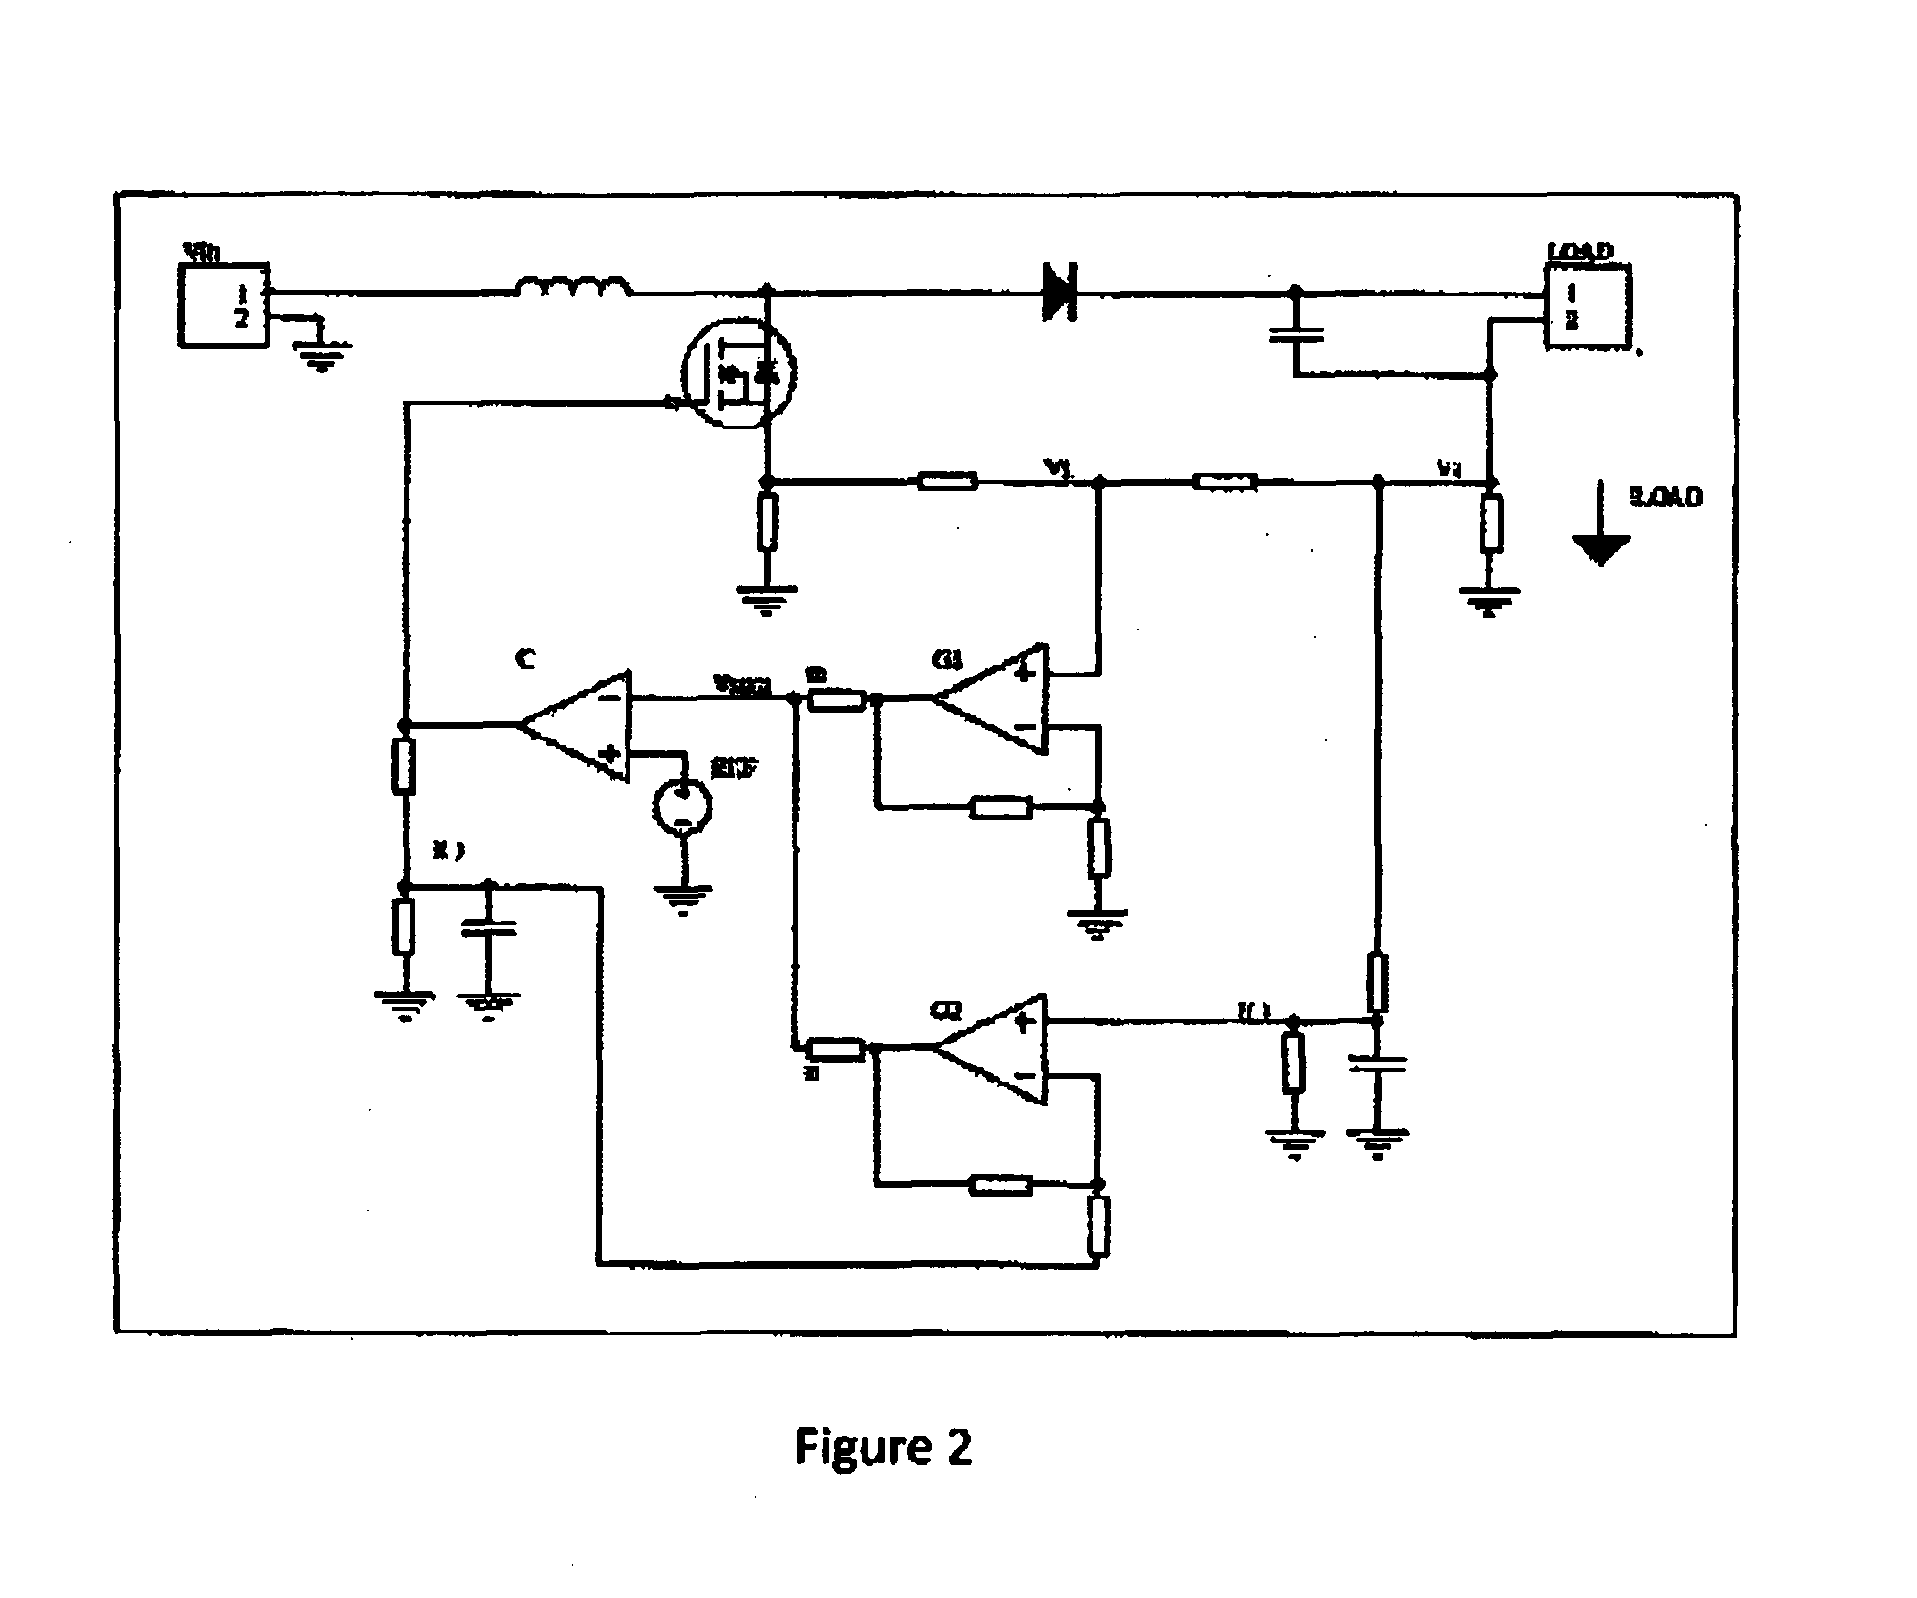 Power supply control system and device